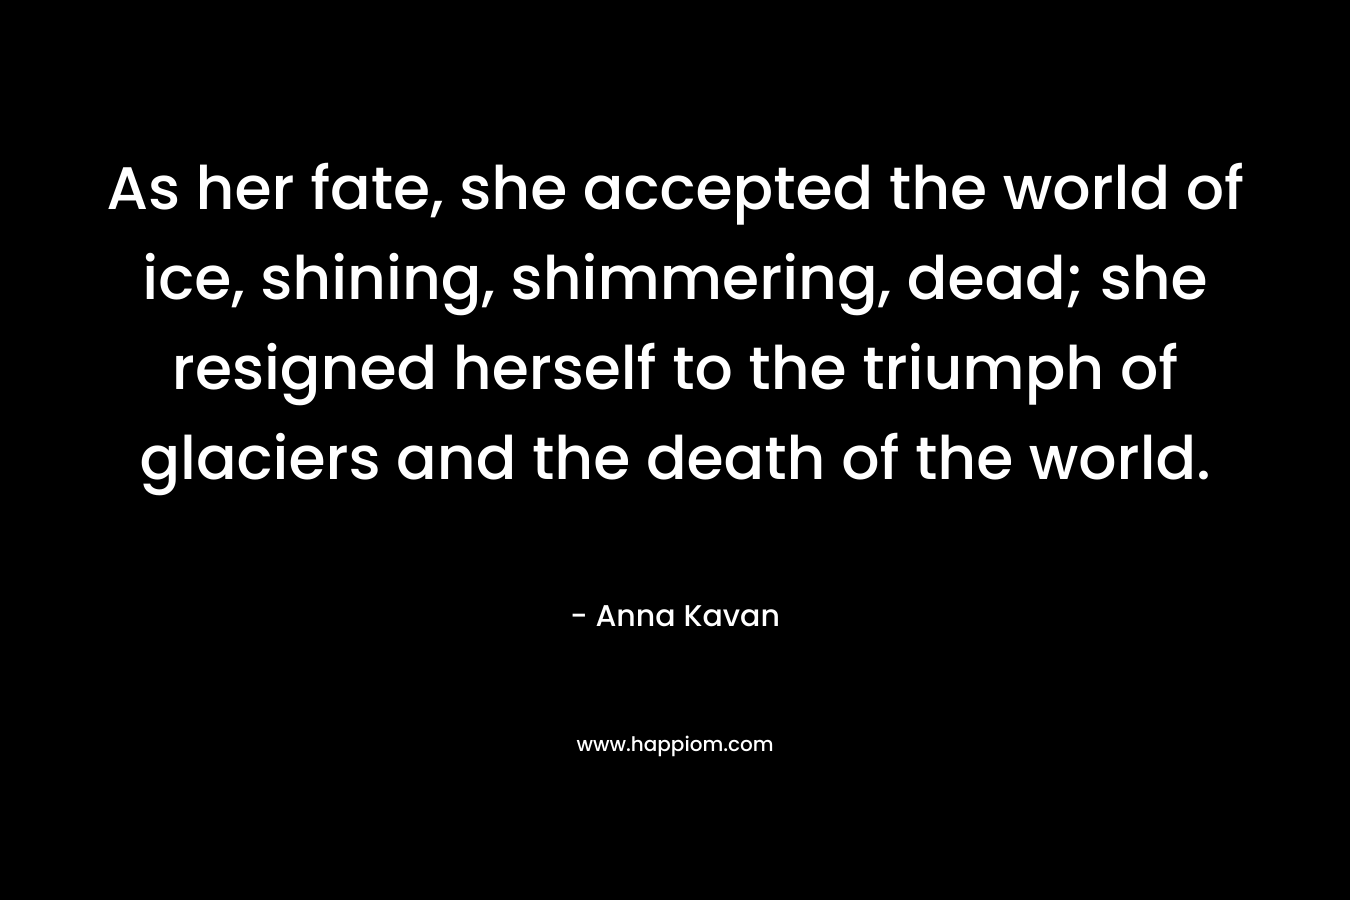 As her fate, she accepted the world of ice, shining, shimmering, dead; she resigned herself to the triumph of glaciers and the death of the world. – Anna Kavan